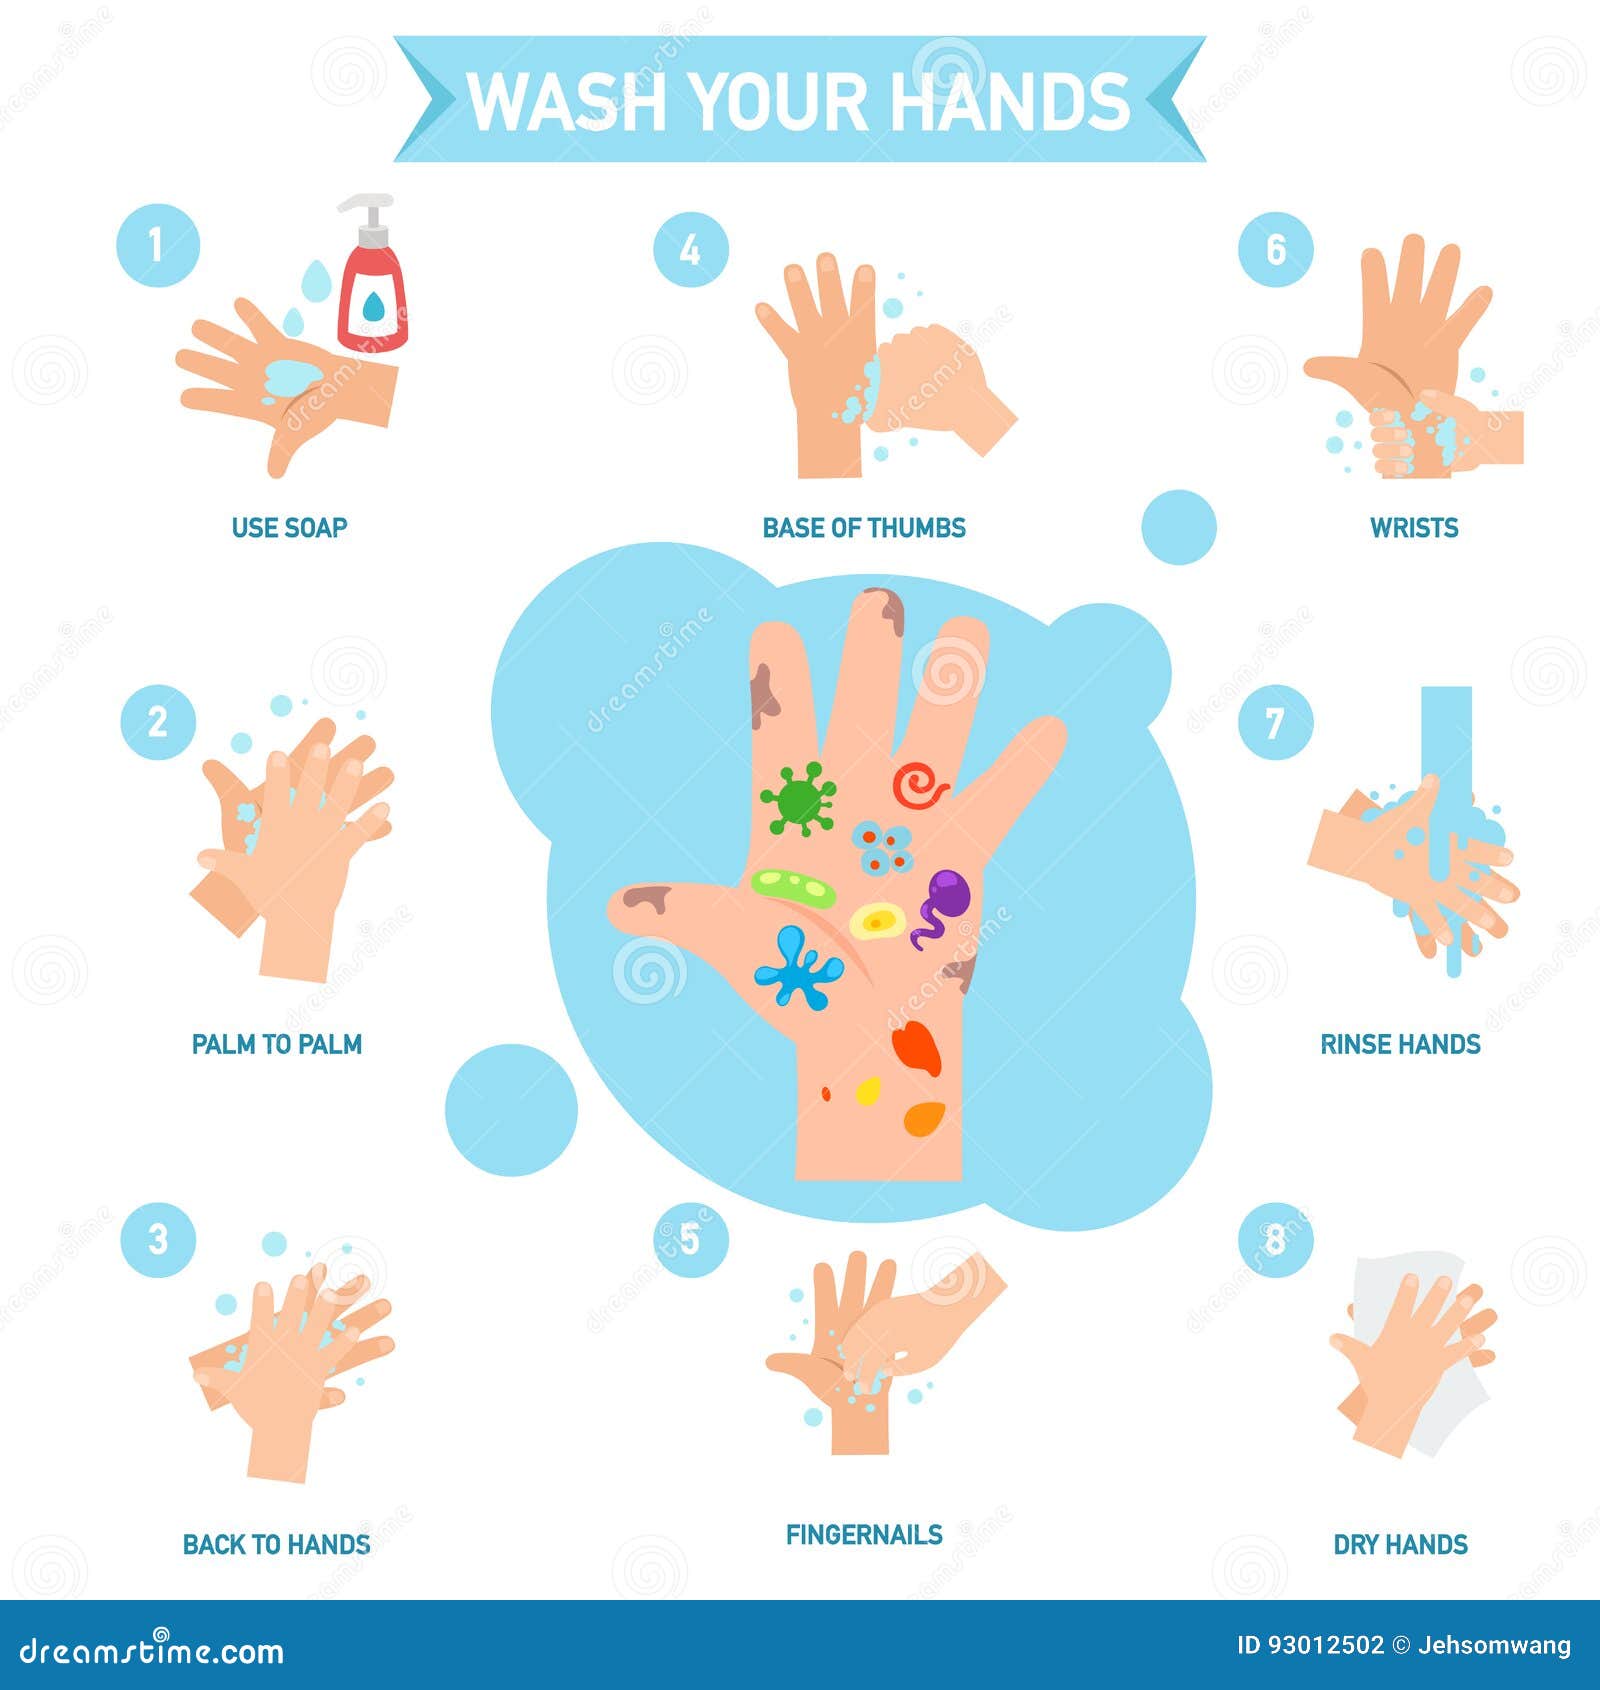 washing hands properly infographic, .